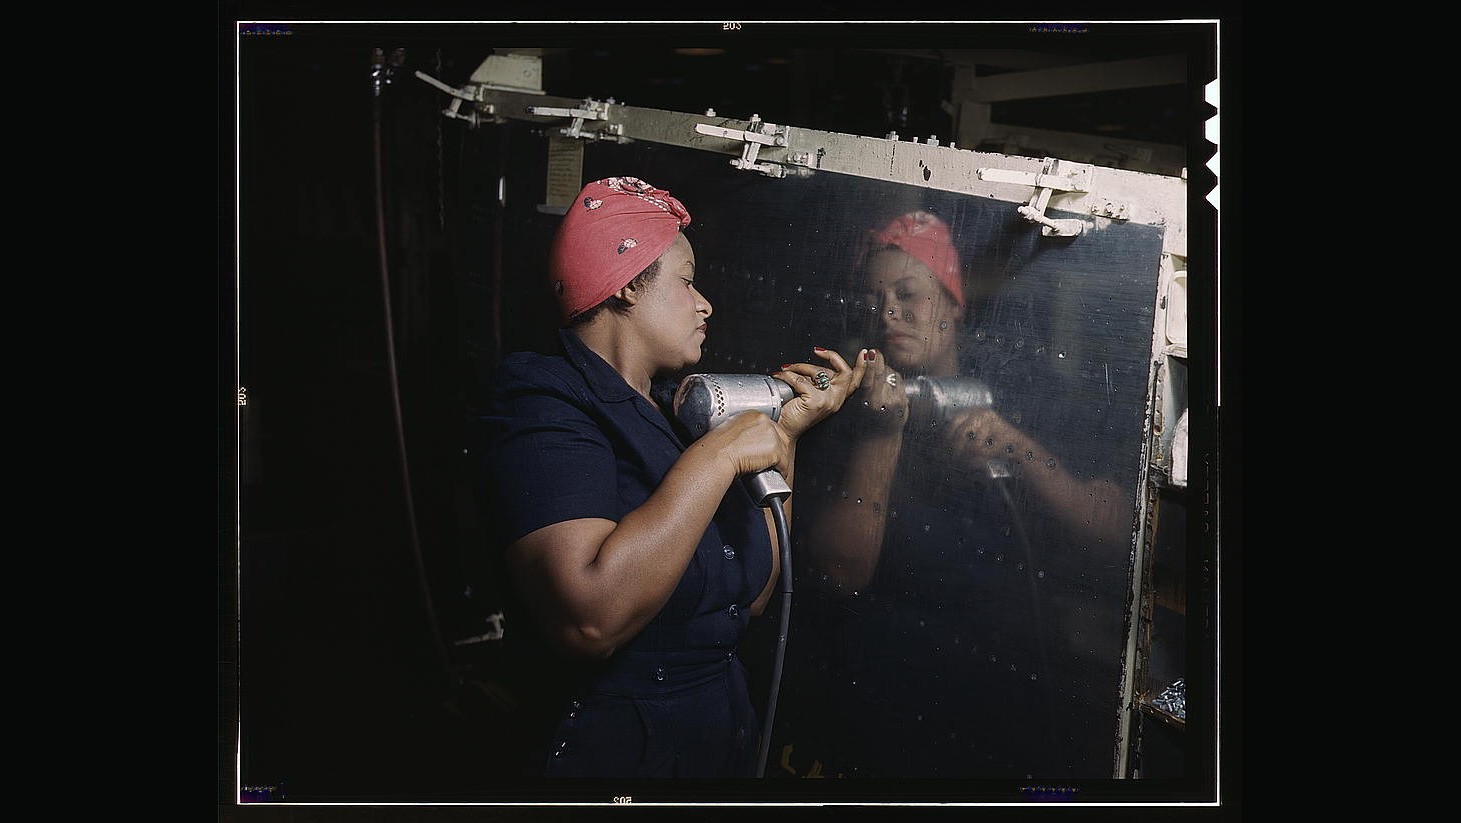 Operating a hand drill at Vultee-Nashville, woman is working on a "Vengeance" dive bomber, Tennessee